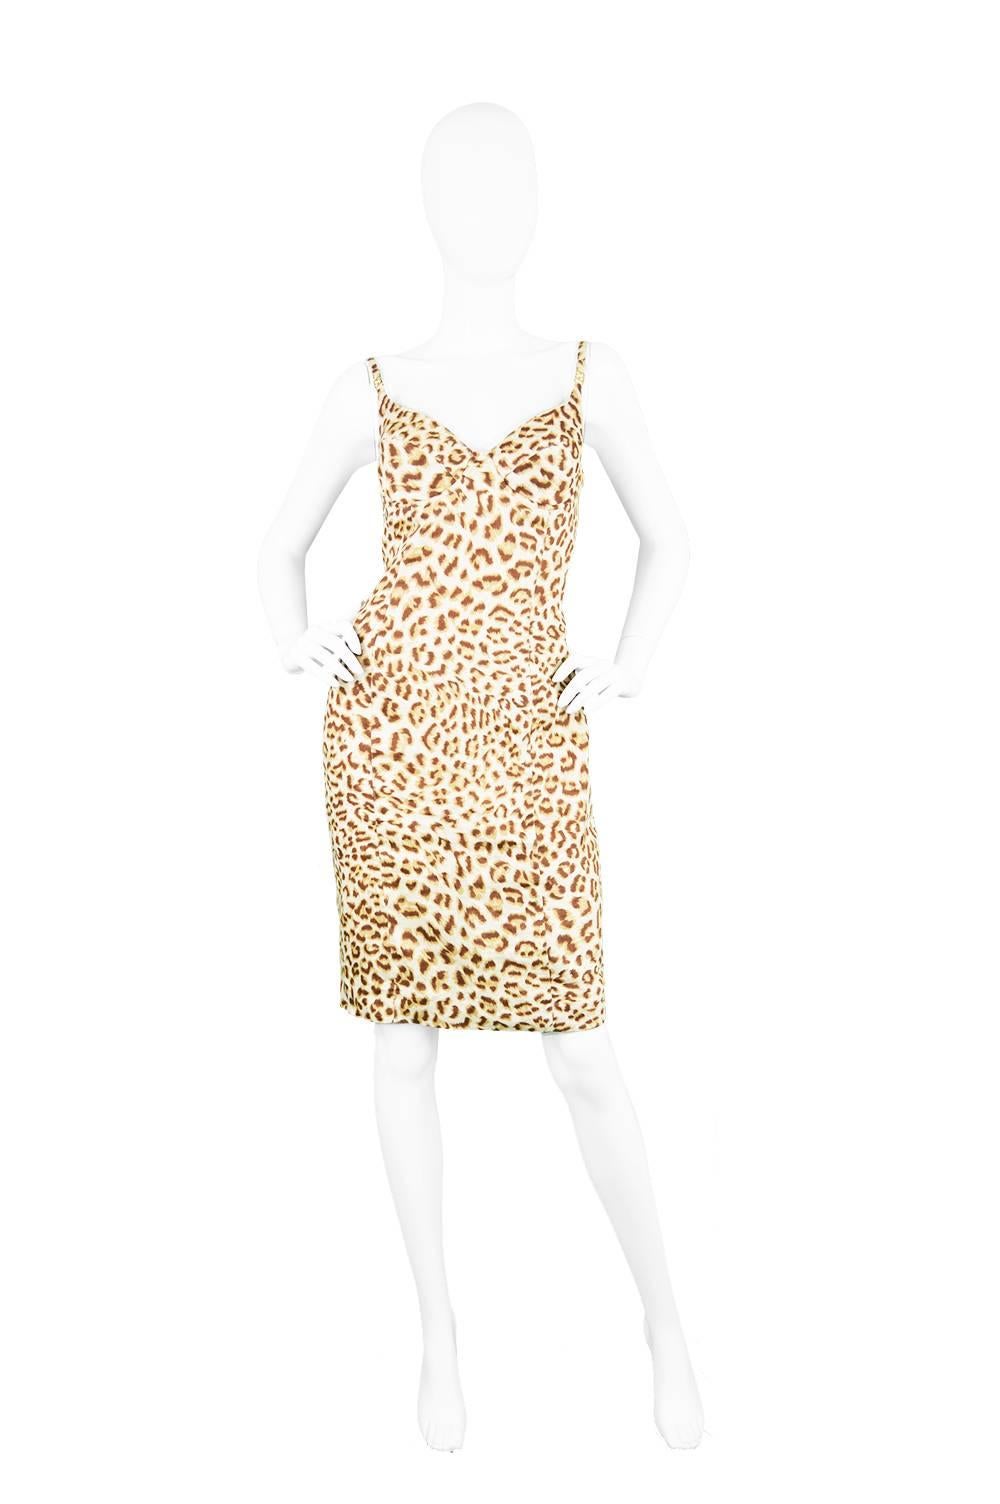 A chic and sexy vintage wiggle dress from the 1980s from luxury designer label, Escada by Margaretha Ley. With a sculpted, built-in bra which creates a sensual, feminine silhouette. The straps have signature gold-tone 'E' hardware which add a